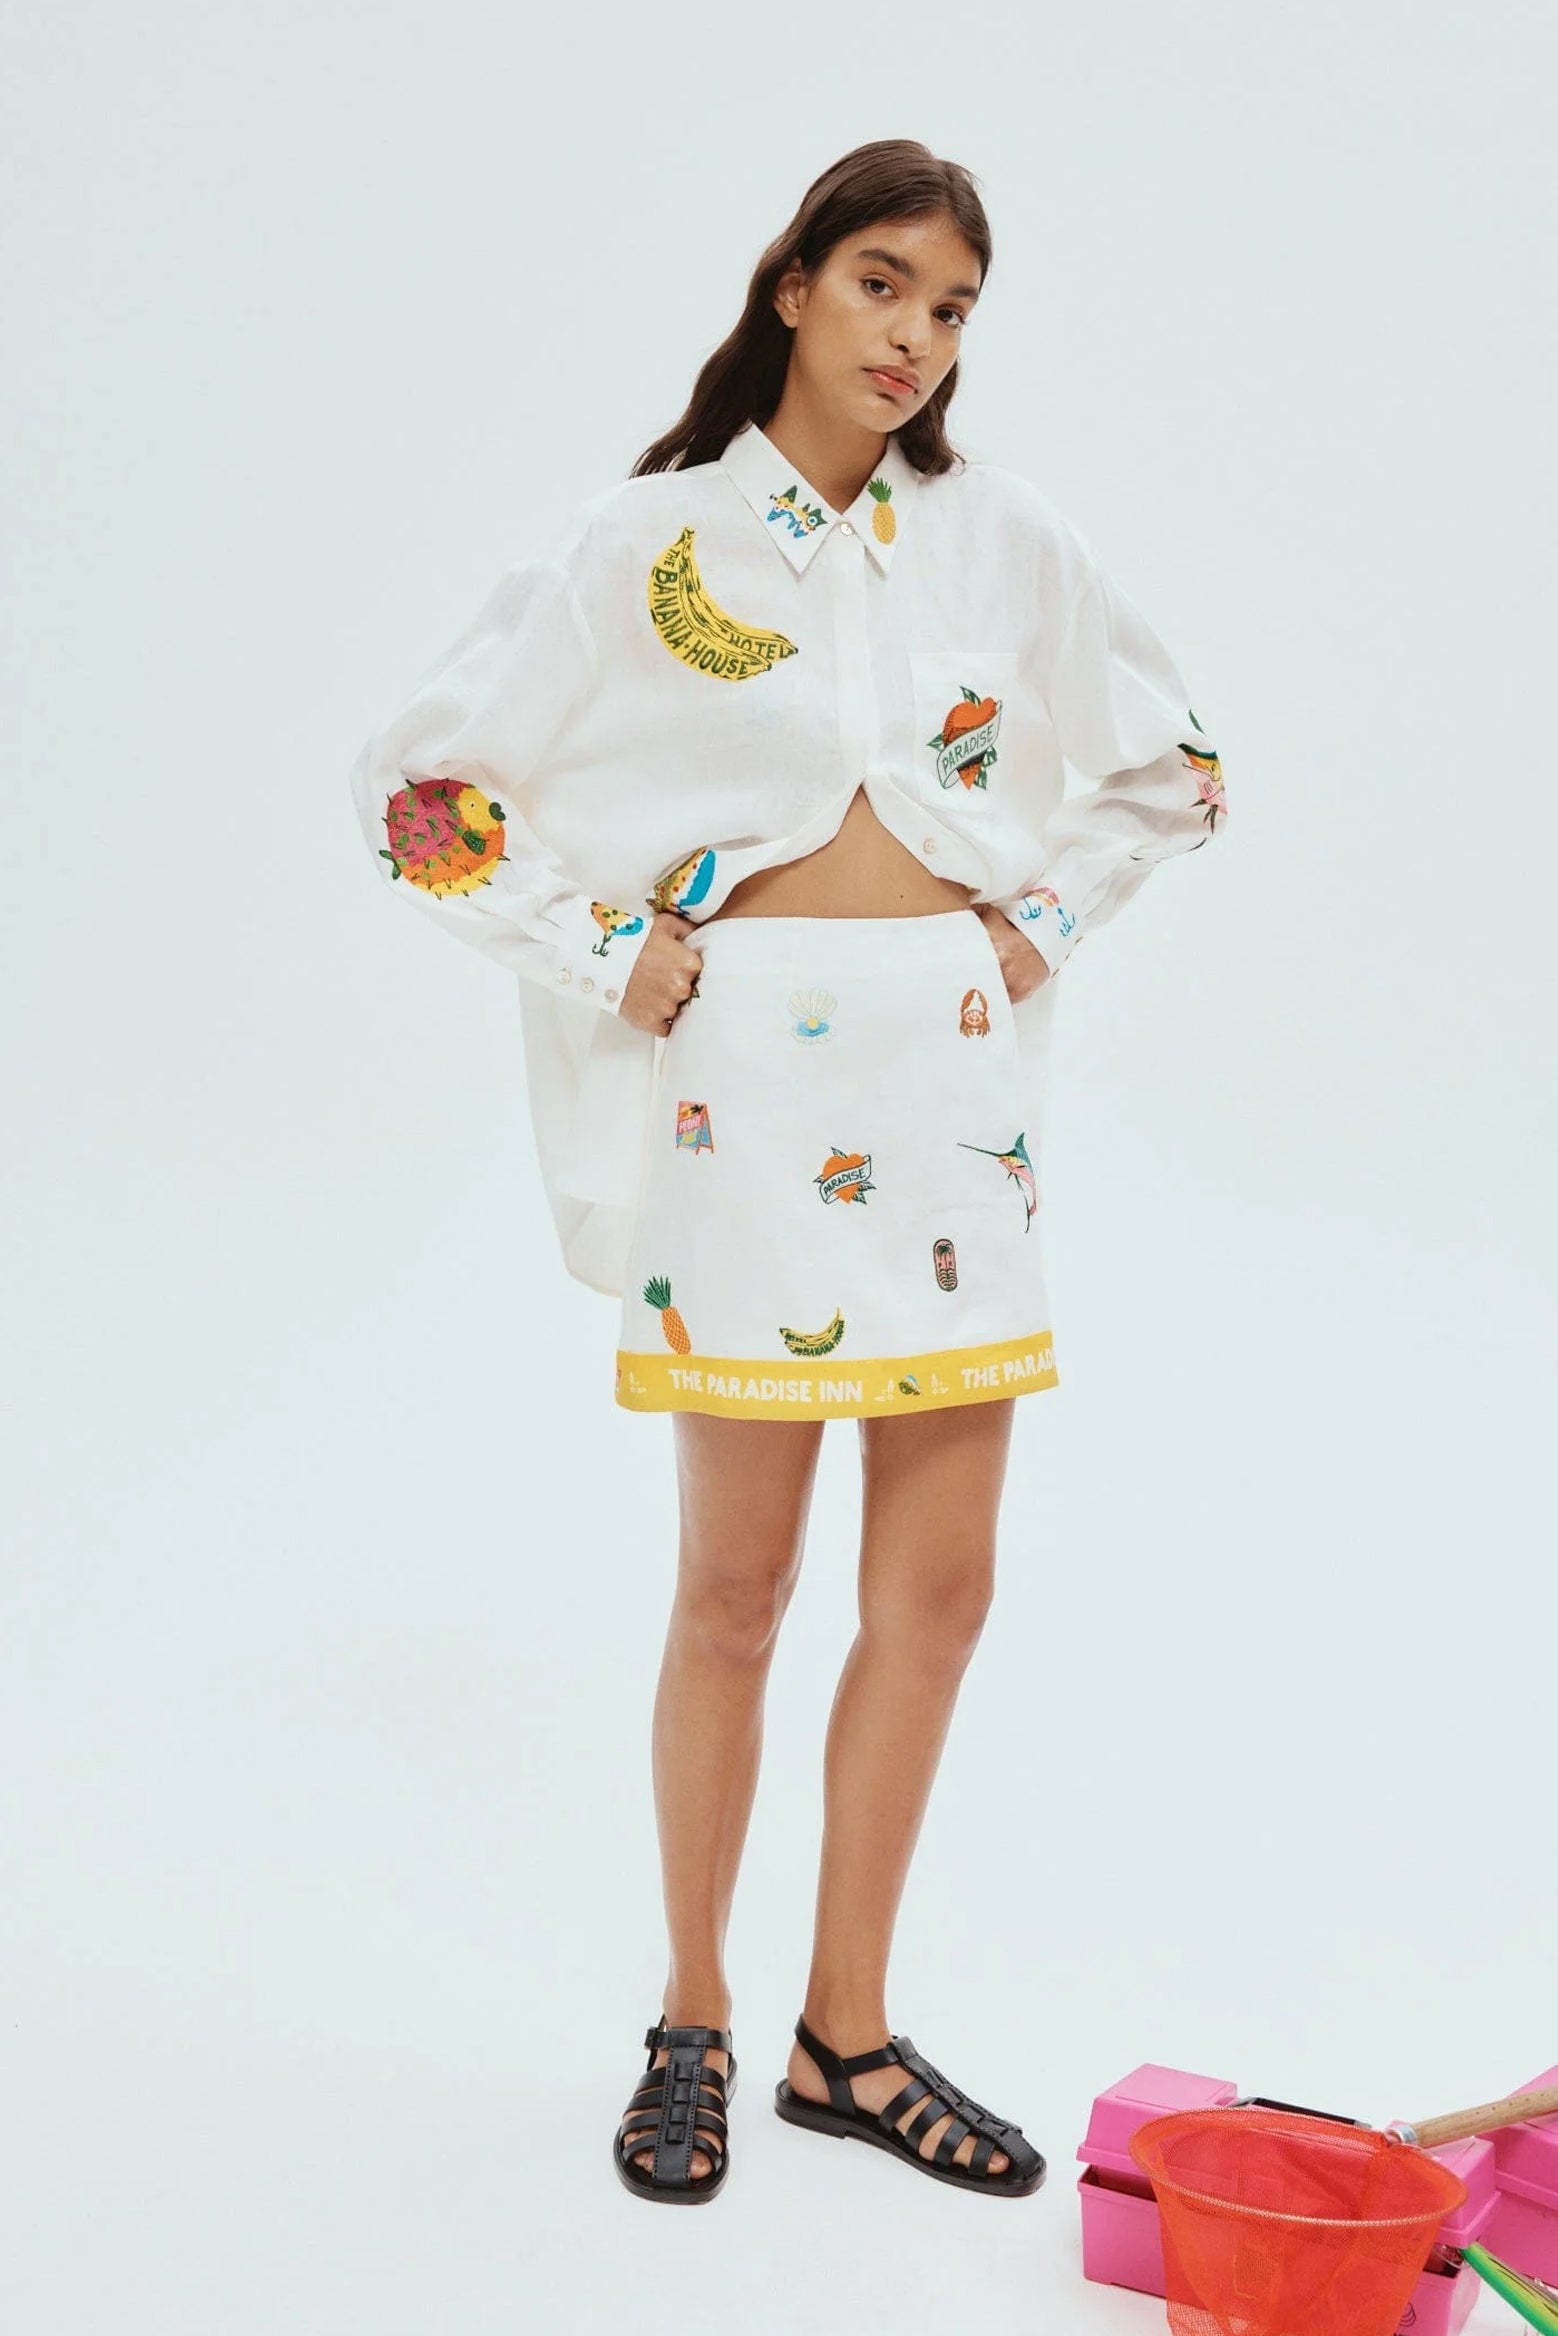 Alemais Blue Marlin Embroidered Skirt in Cream available at The New Trend Australia.